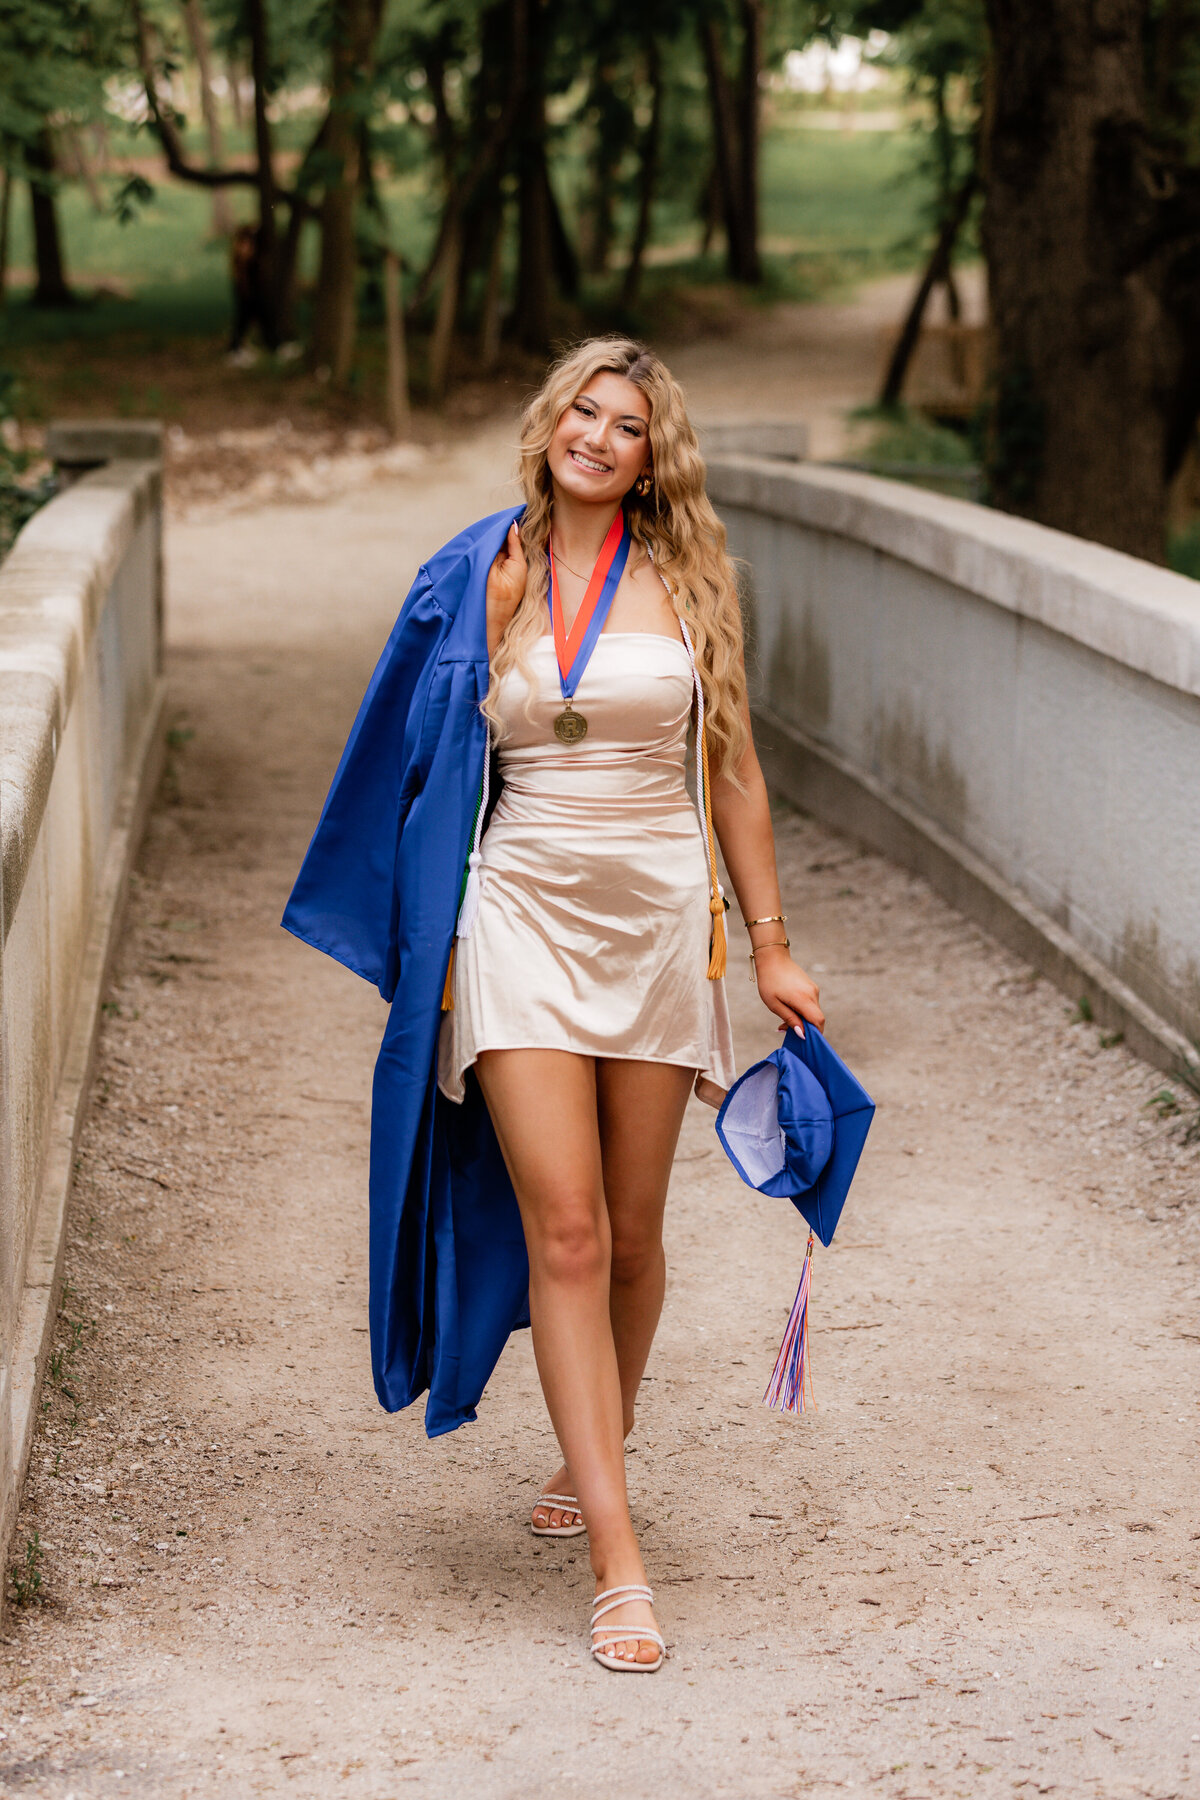 Girl does a runway walk with her graduation gown over her shoulder.